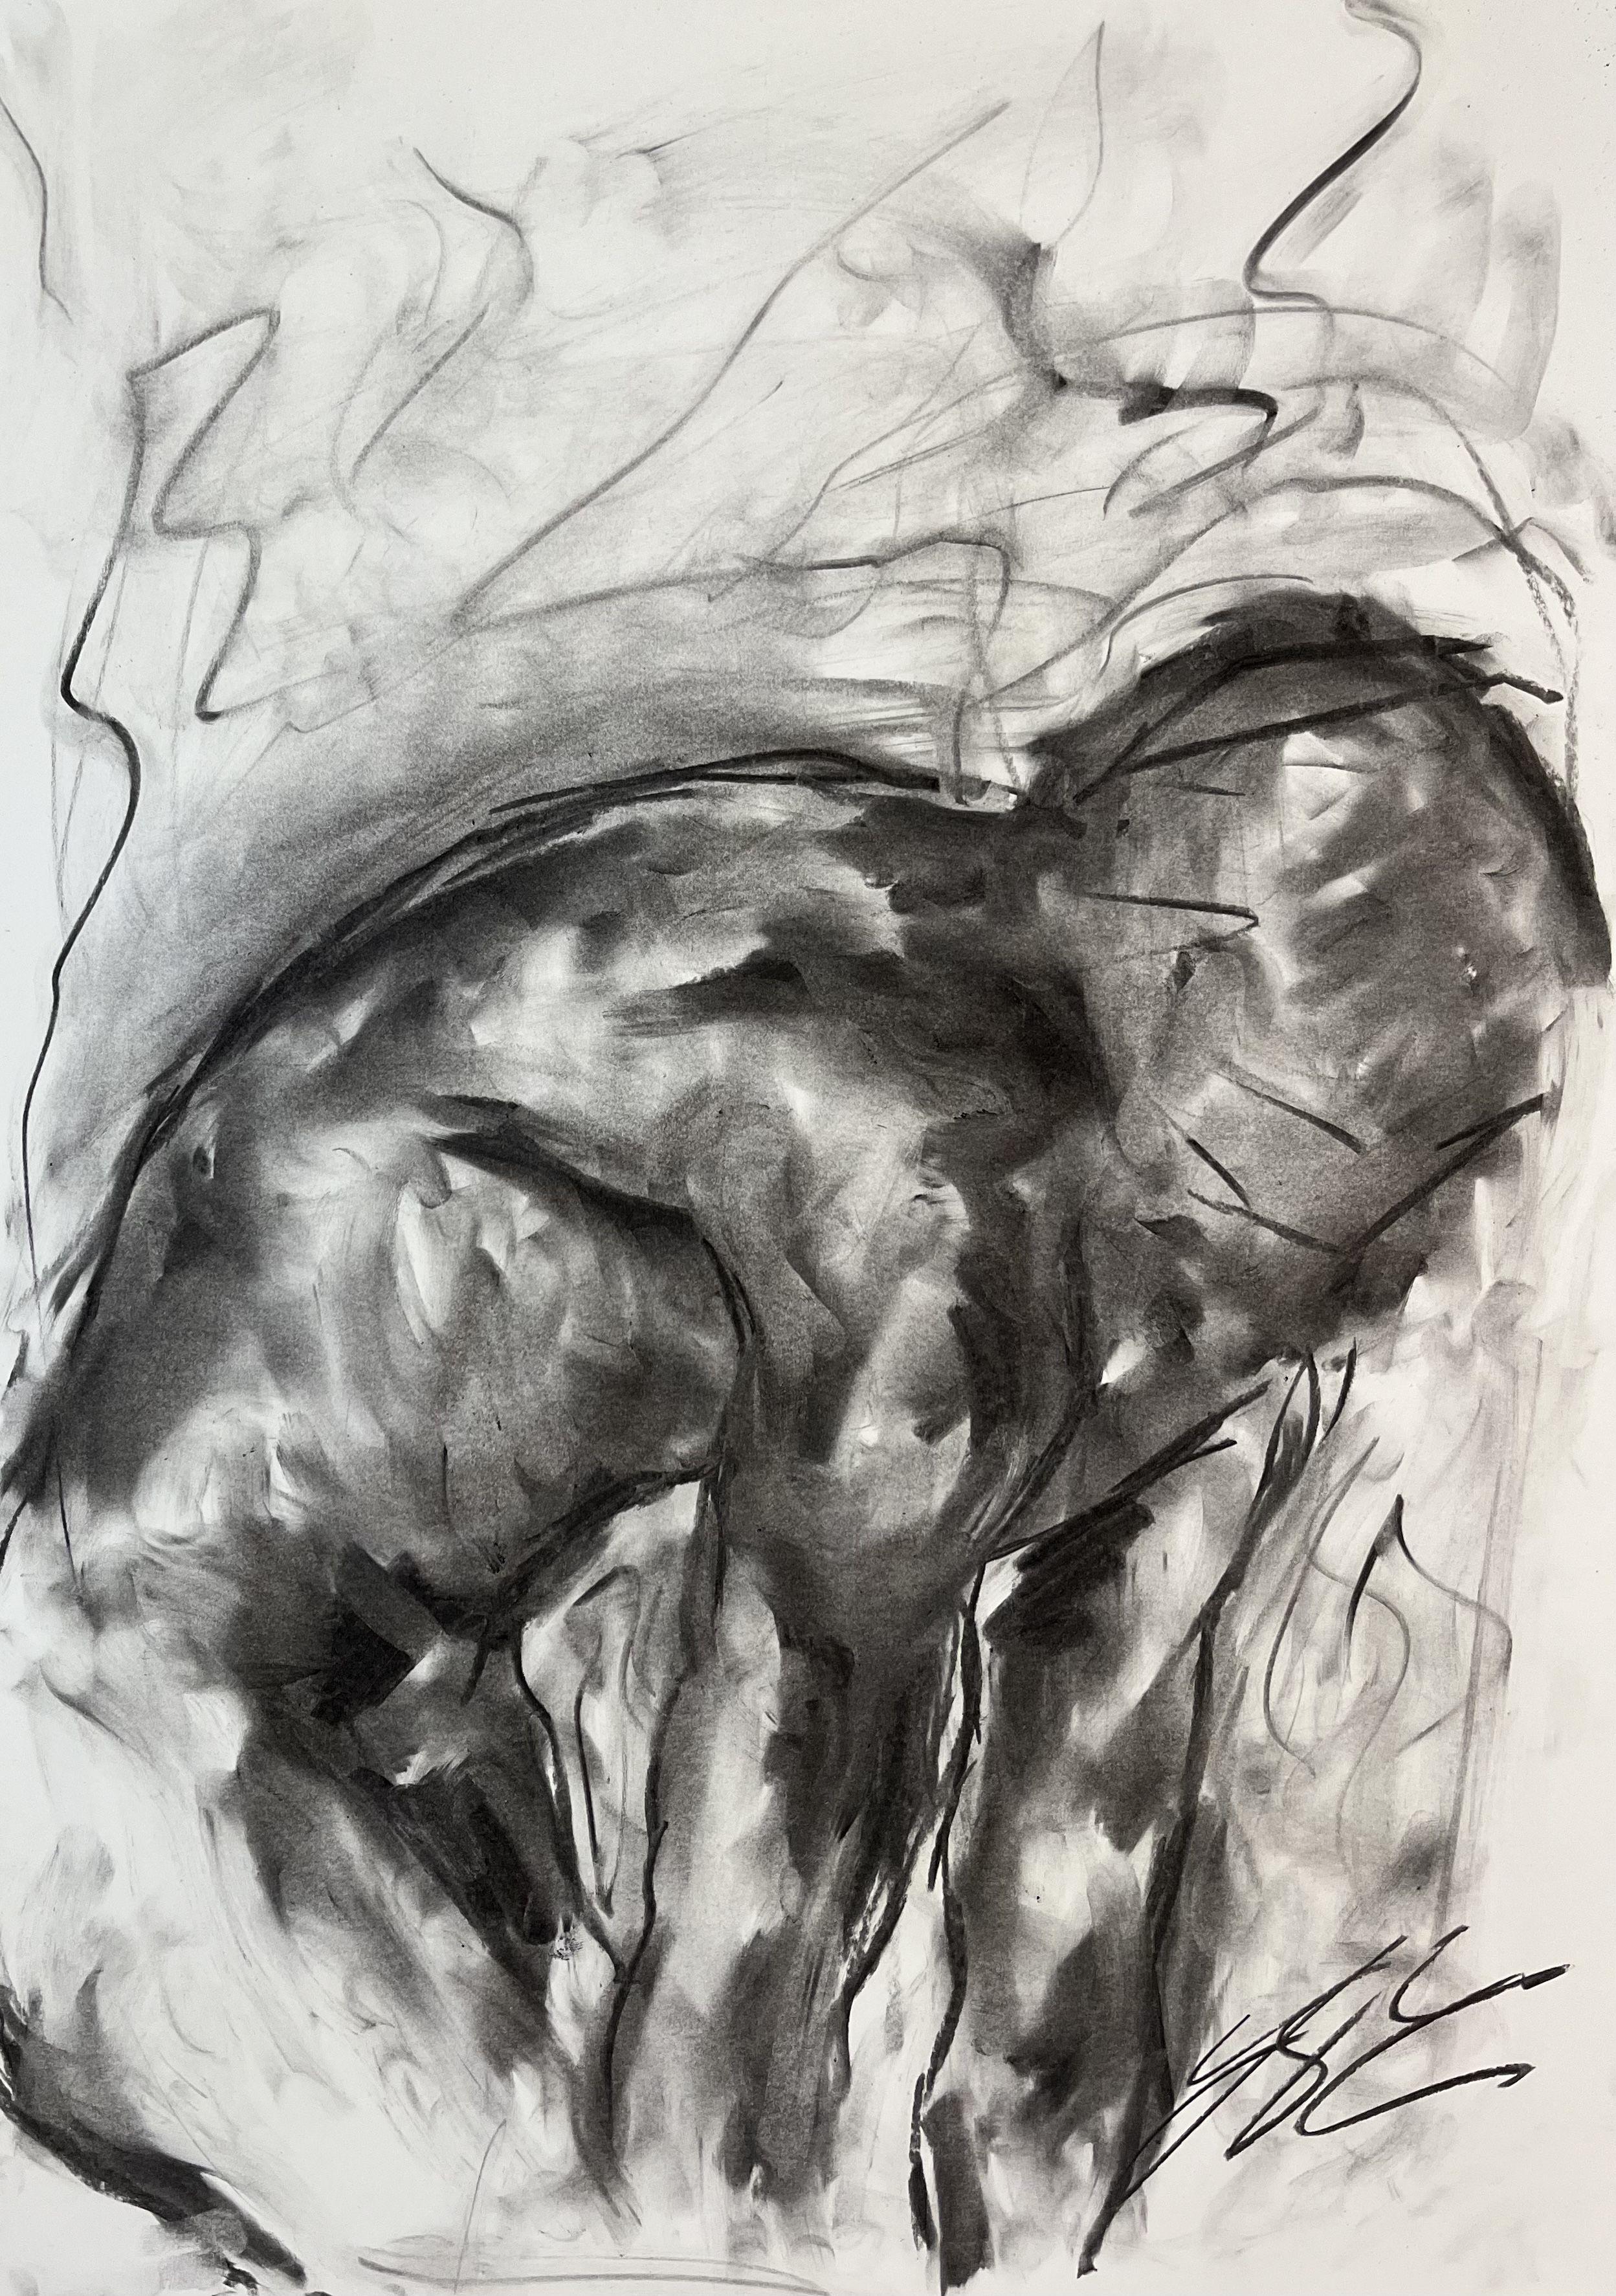 Run, Drawing, Charcoal on Paper - Art by James Shipton